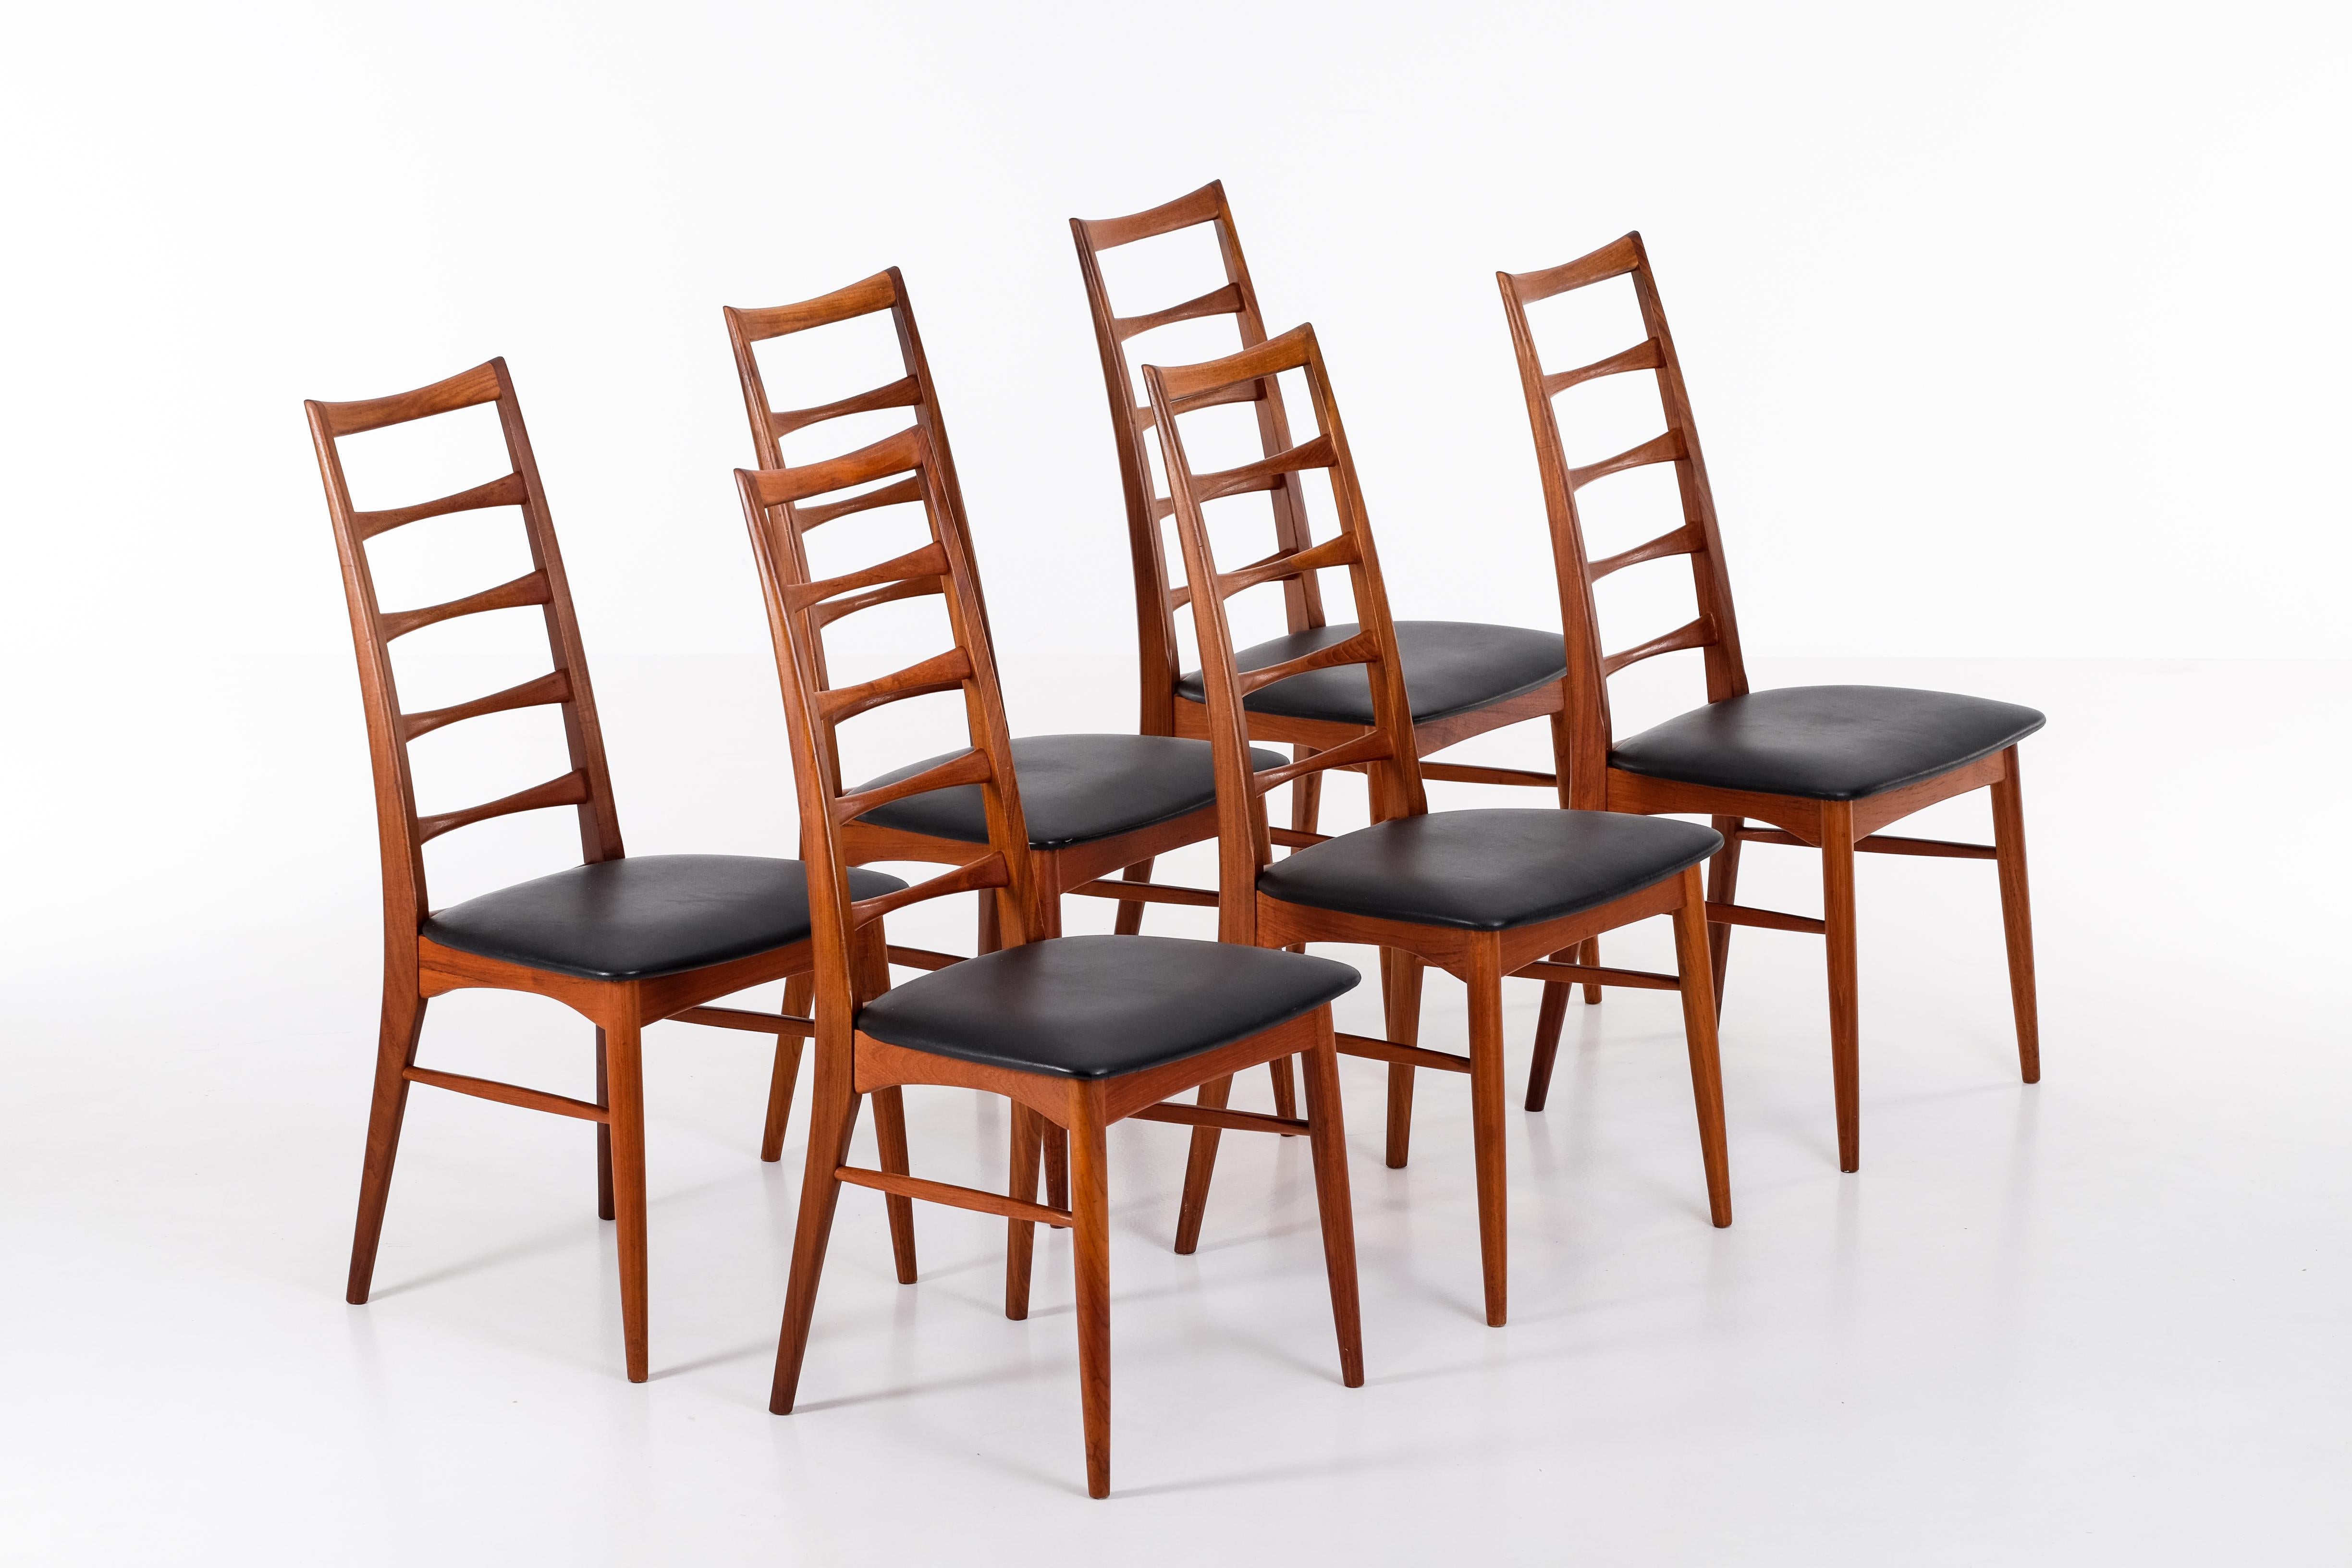 Mid-20th Century Set of 6 'Lis' chairs by Niels Koefoed, Denmark, 1960s For Sale